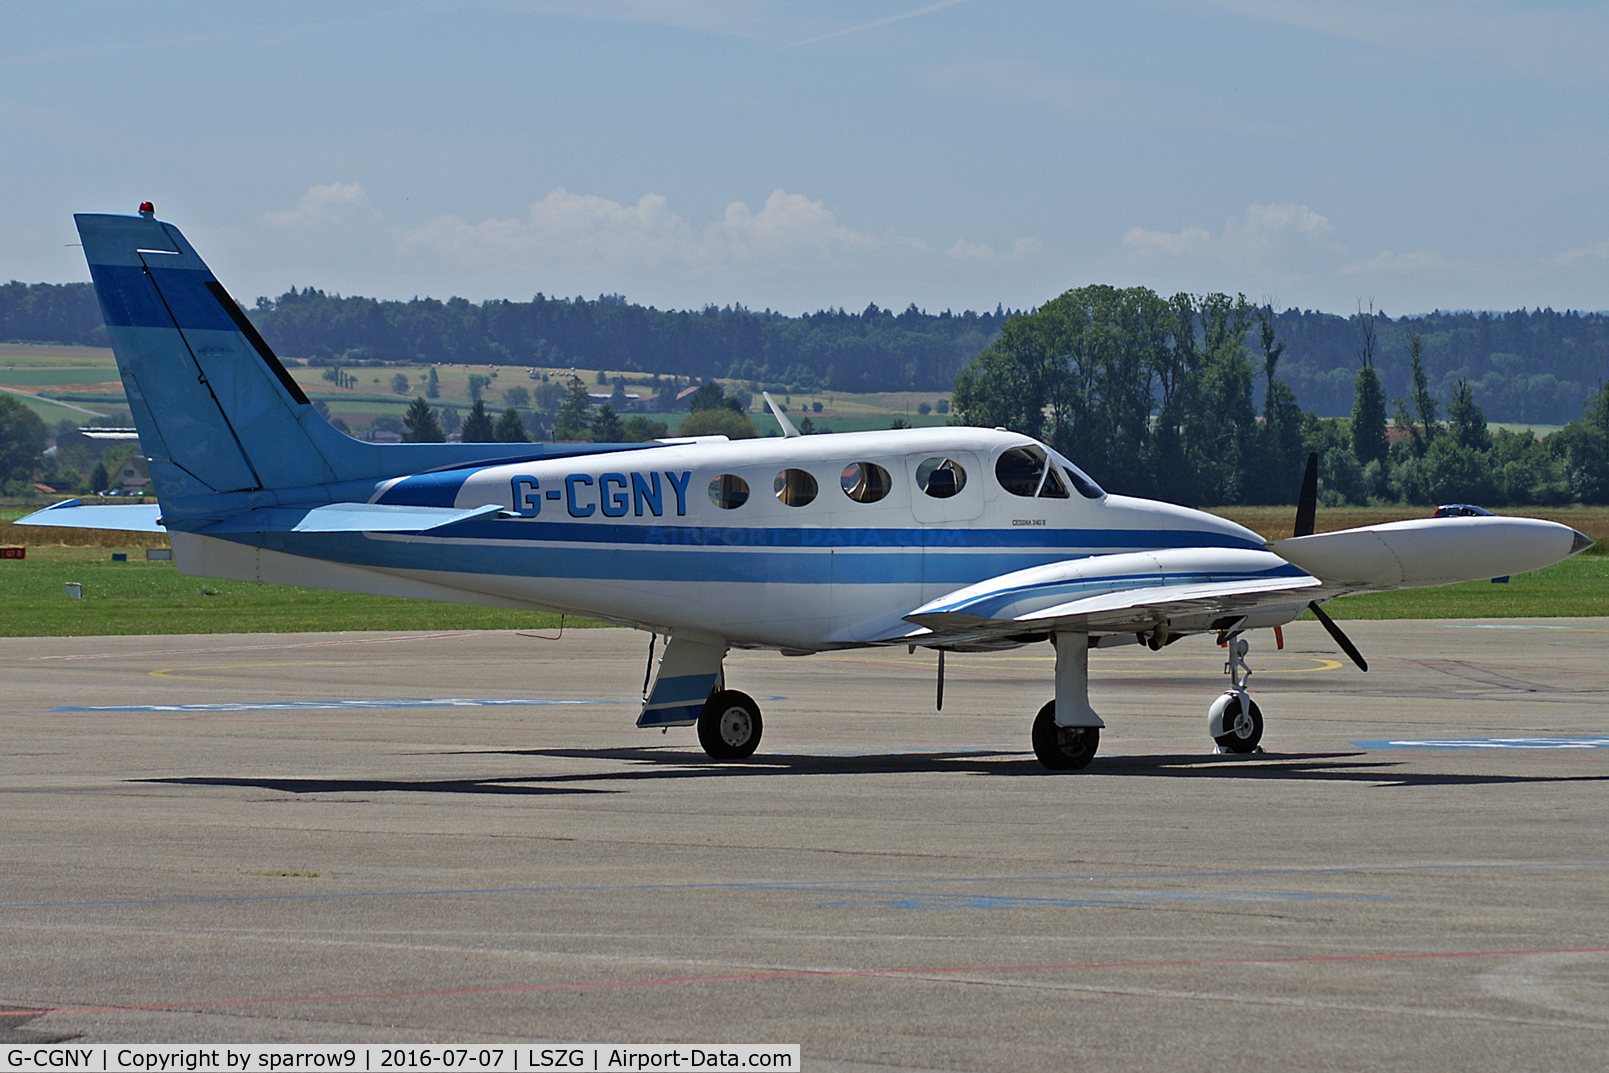 G-CGNY, 1979 Cessna 340A C/N 340A-0948, At Grenchen airport. Deregistered 2018-06-22 and reregistered HB-LMN 2018-09-03